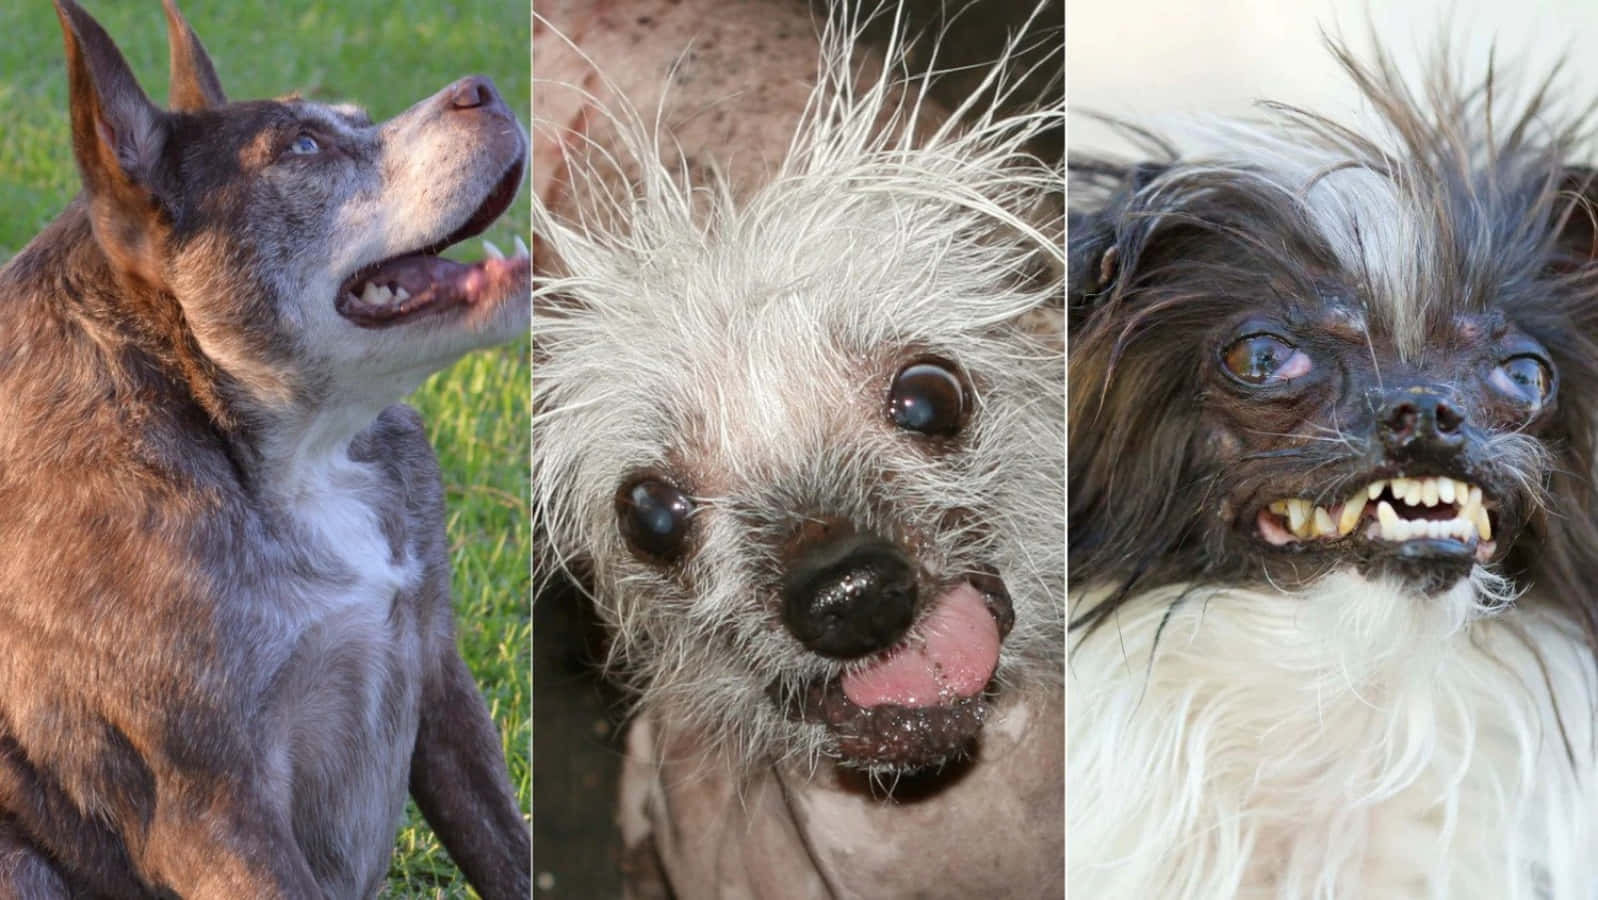 A display of distinctive canine charm - Ugly Dogs